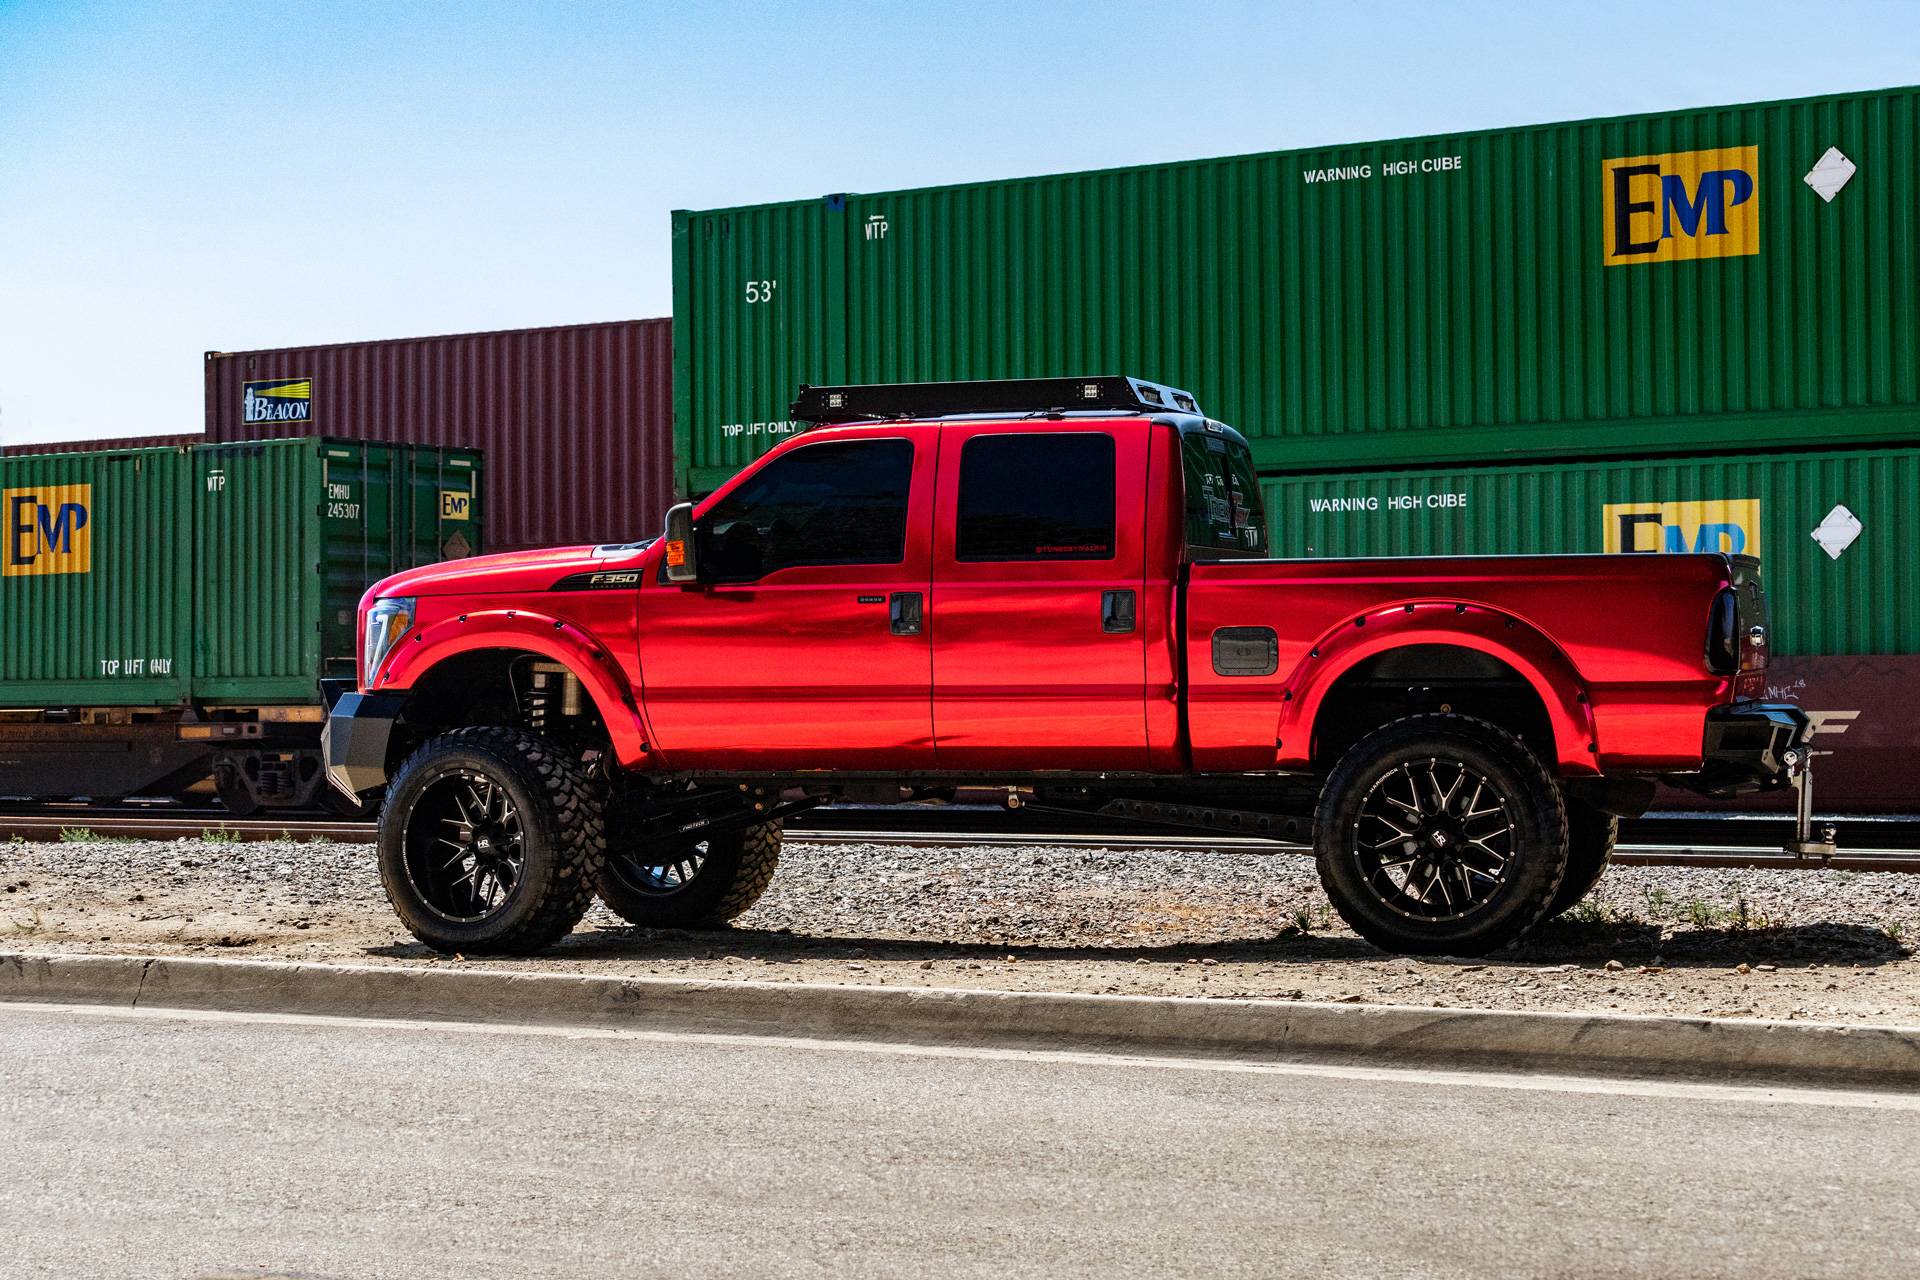 HardRock Offroad Aftermarket Offroad Wheels On A Ford F350